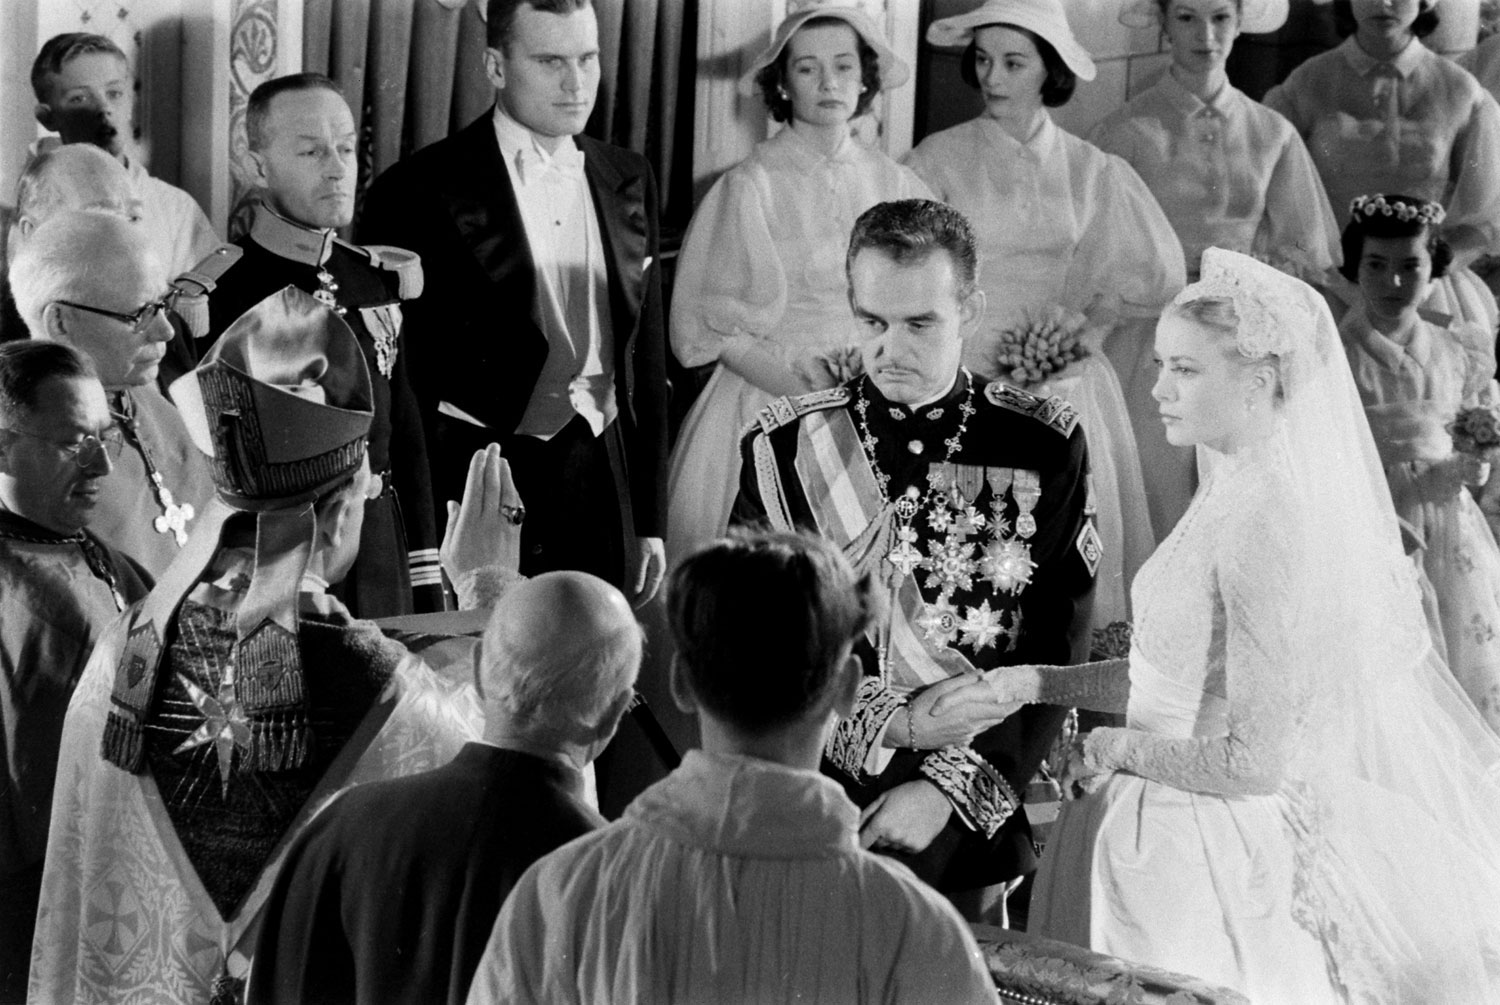 Grace Kelly and Prince Rainier join hands as the Bishop of Monaco, Mgr. Gilles Barthe, administers the nuptial benediction at Saint Nicholas Cathedral, April 1956.